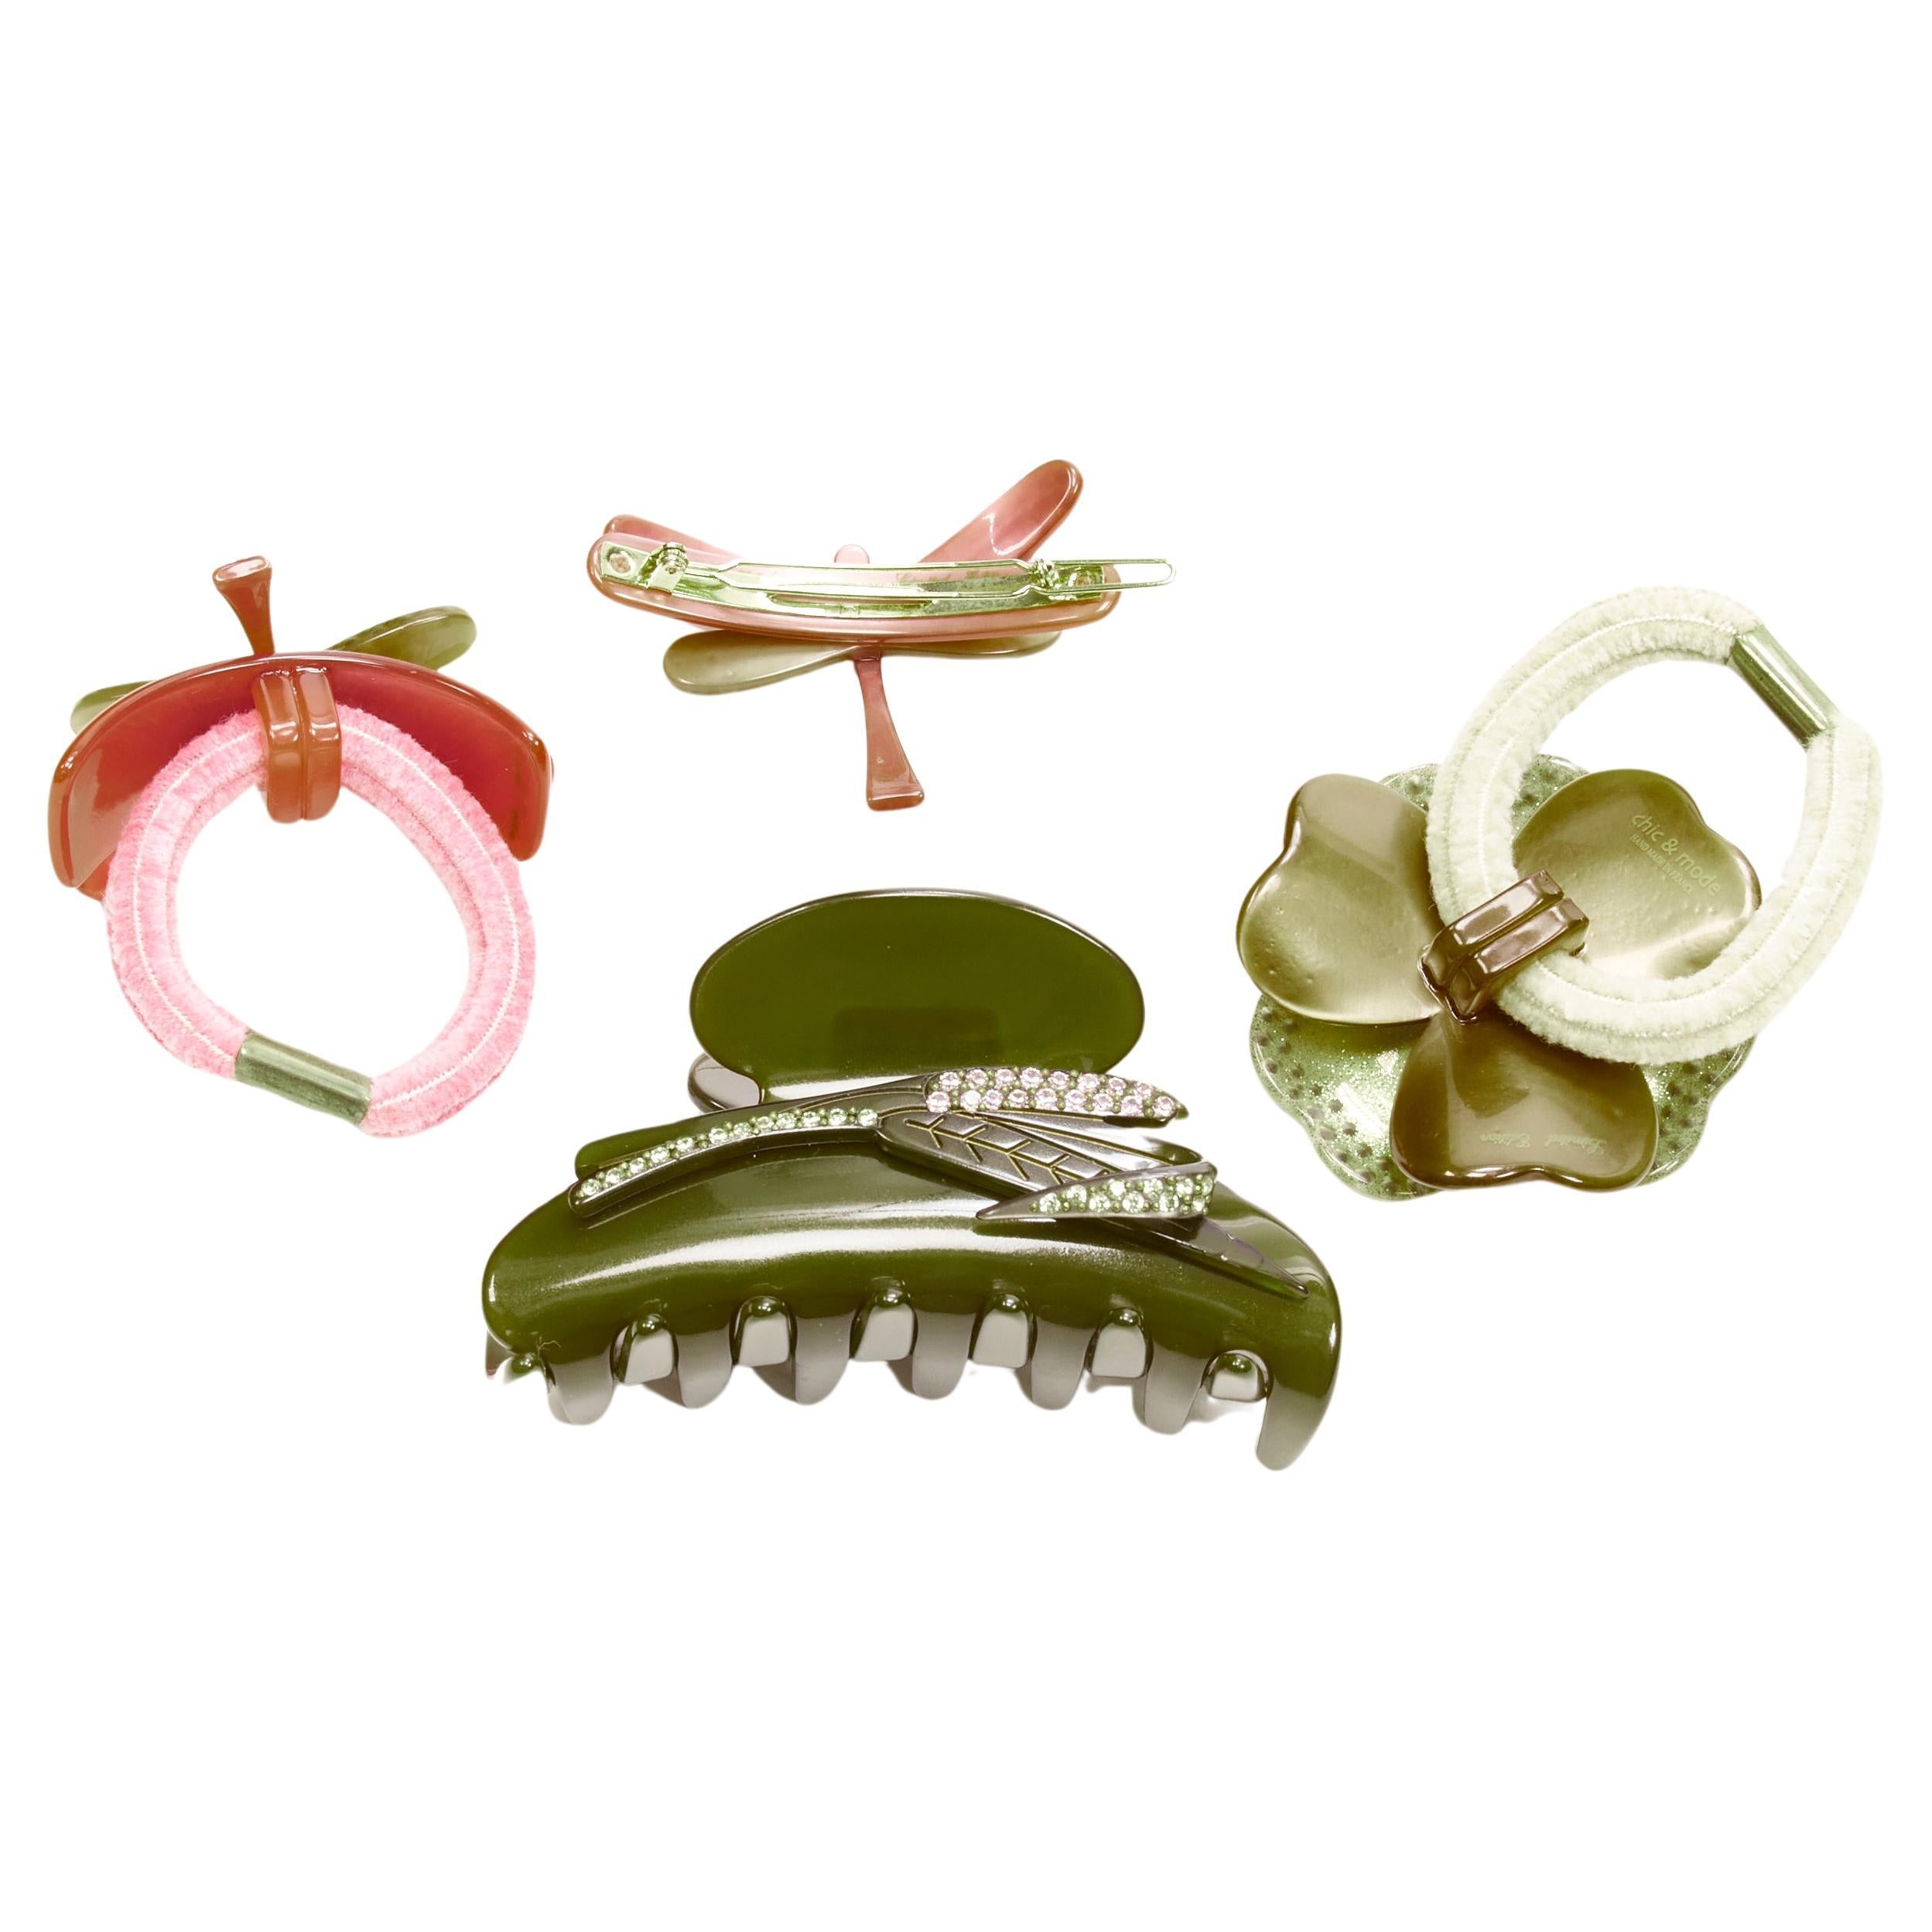 CHIC & MODE Alexandre Zouari pink green dragonfly flower hair clamp clip tie X4 For Sale